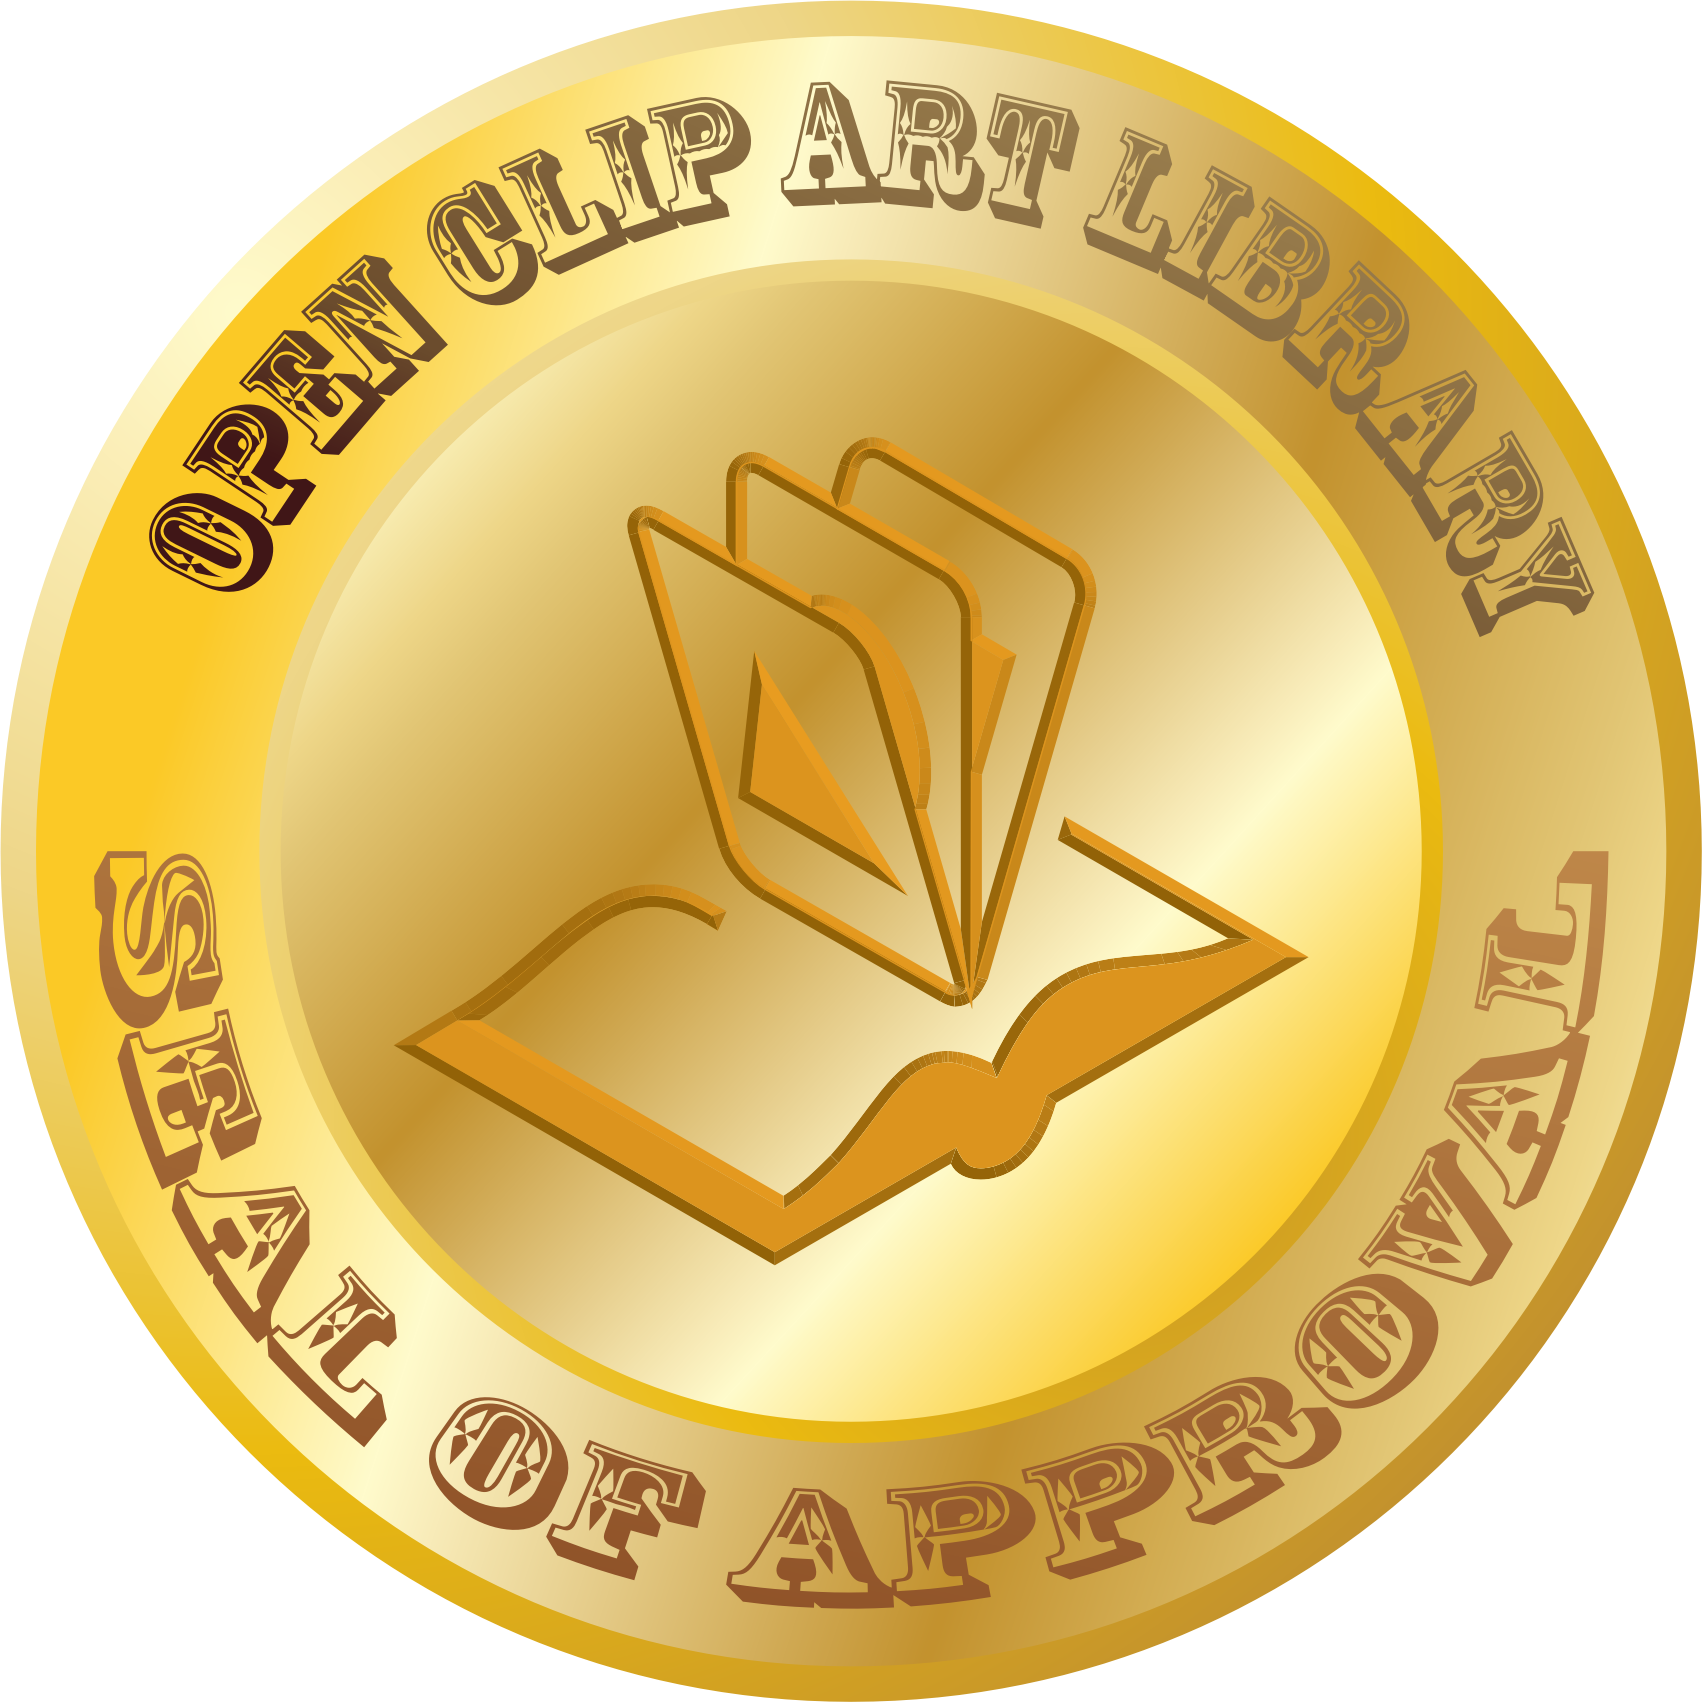 Open Clip Art Library Seal of Approval Clip arts